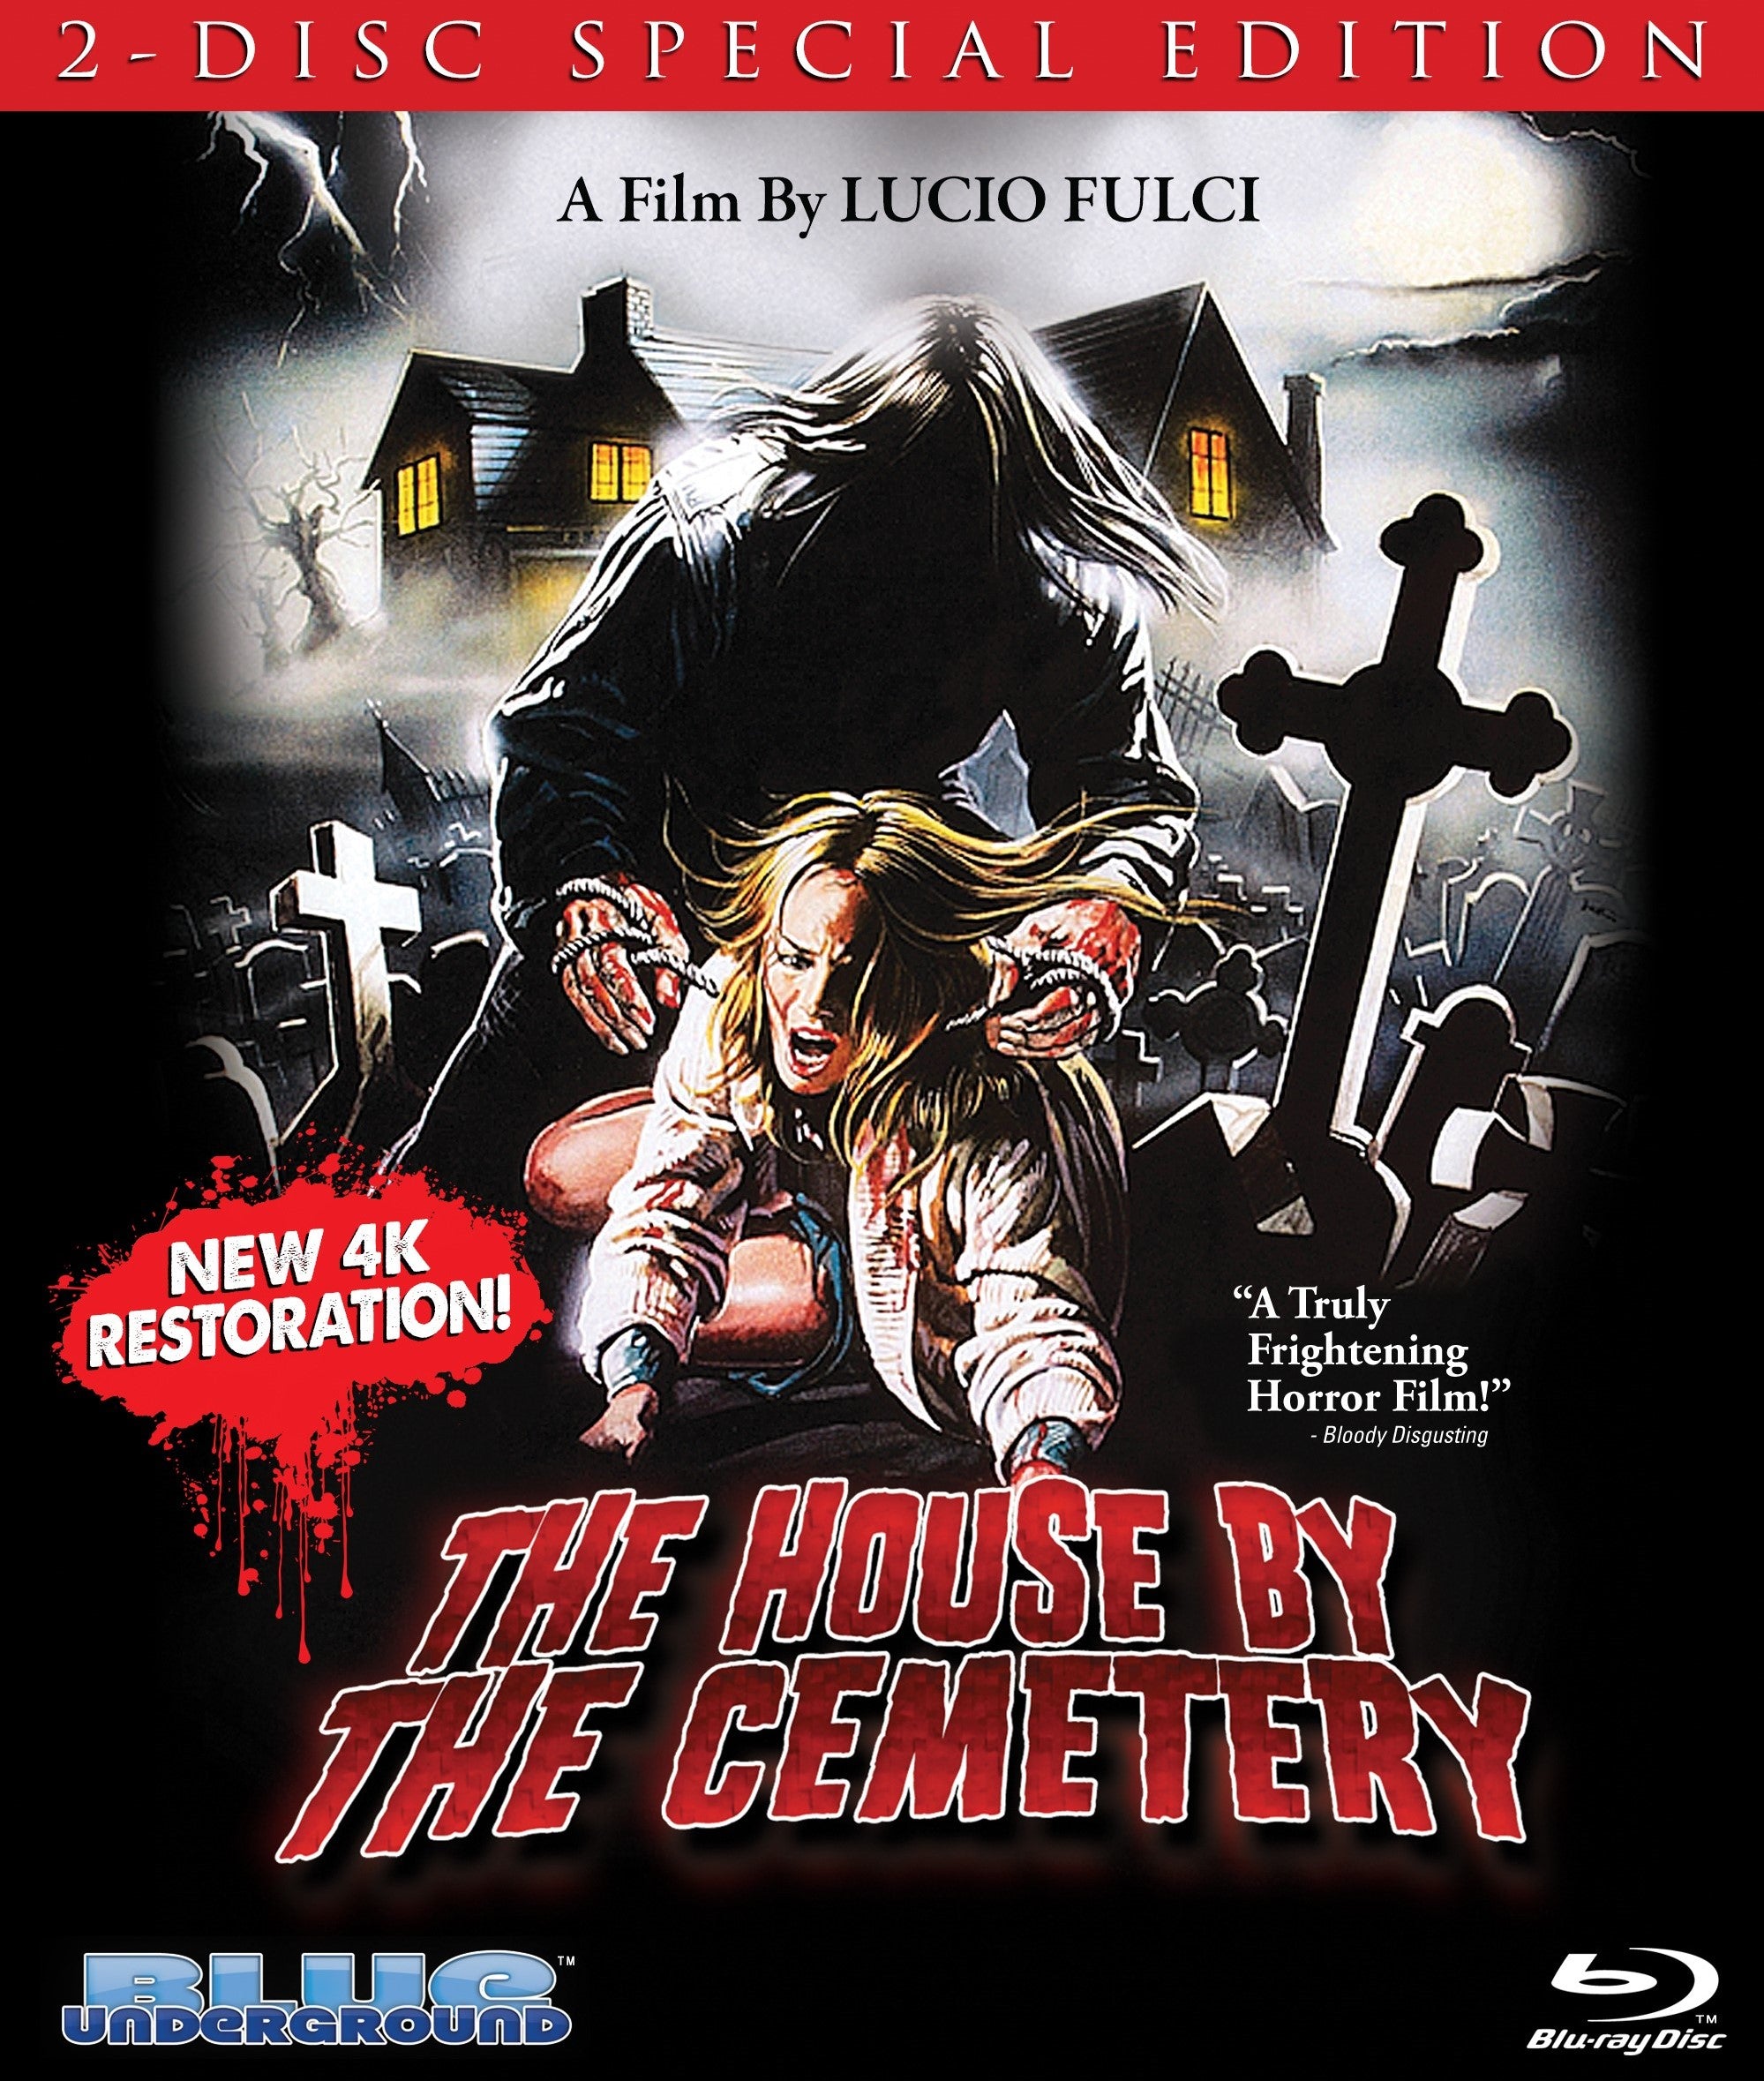 THE HOUSE BY THE CEMETERY (2-DISC SPECIAL EDITION) BLU-RAY